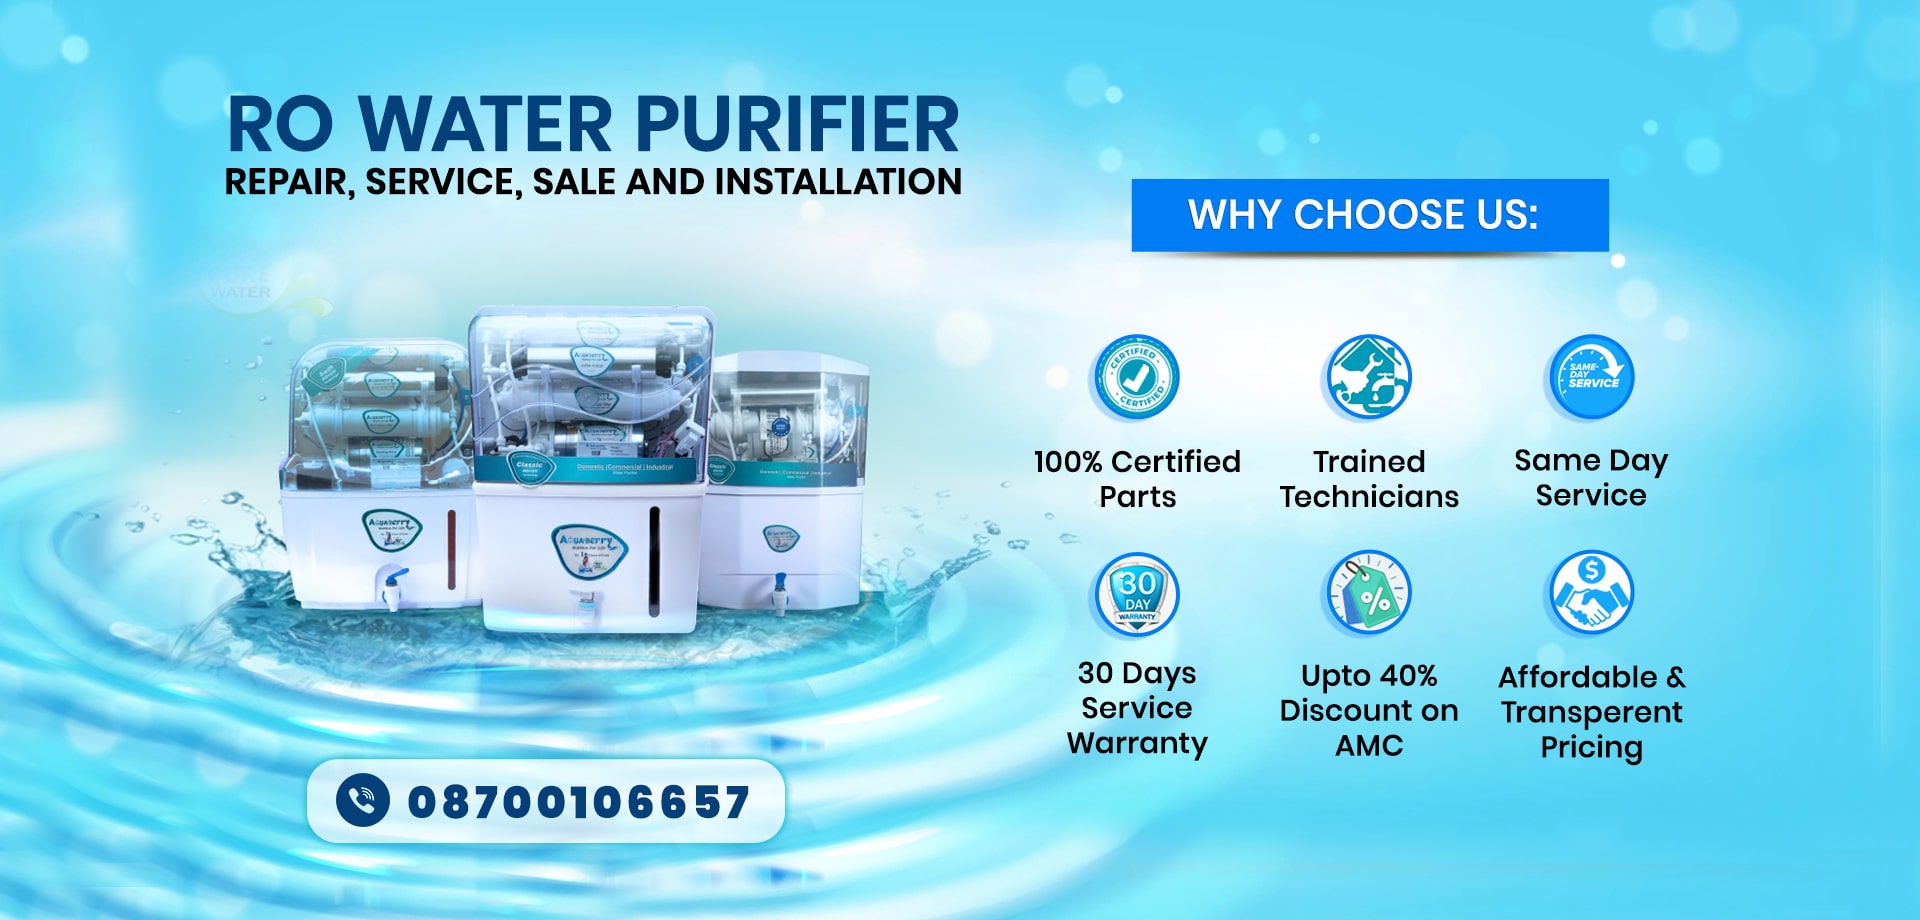 RO water purifier services Near You